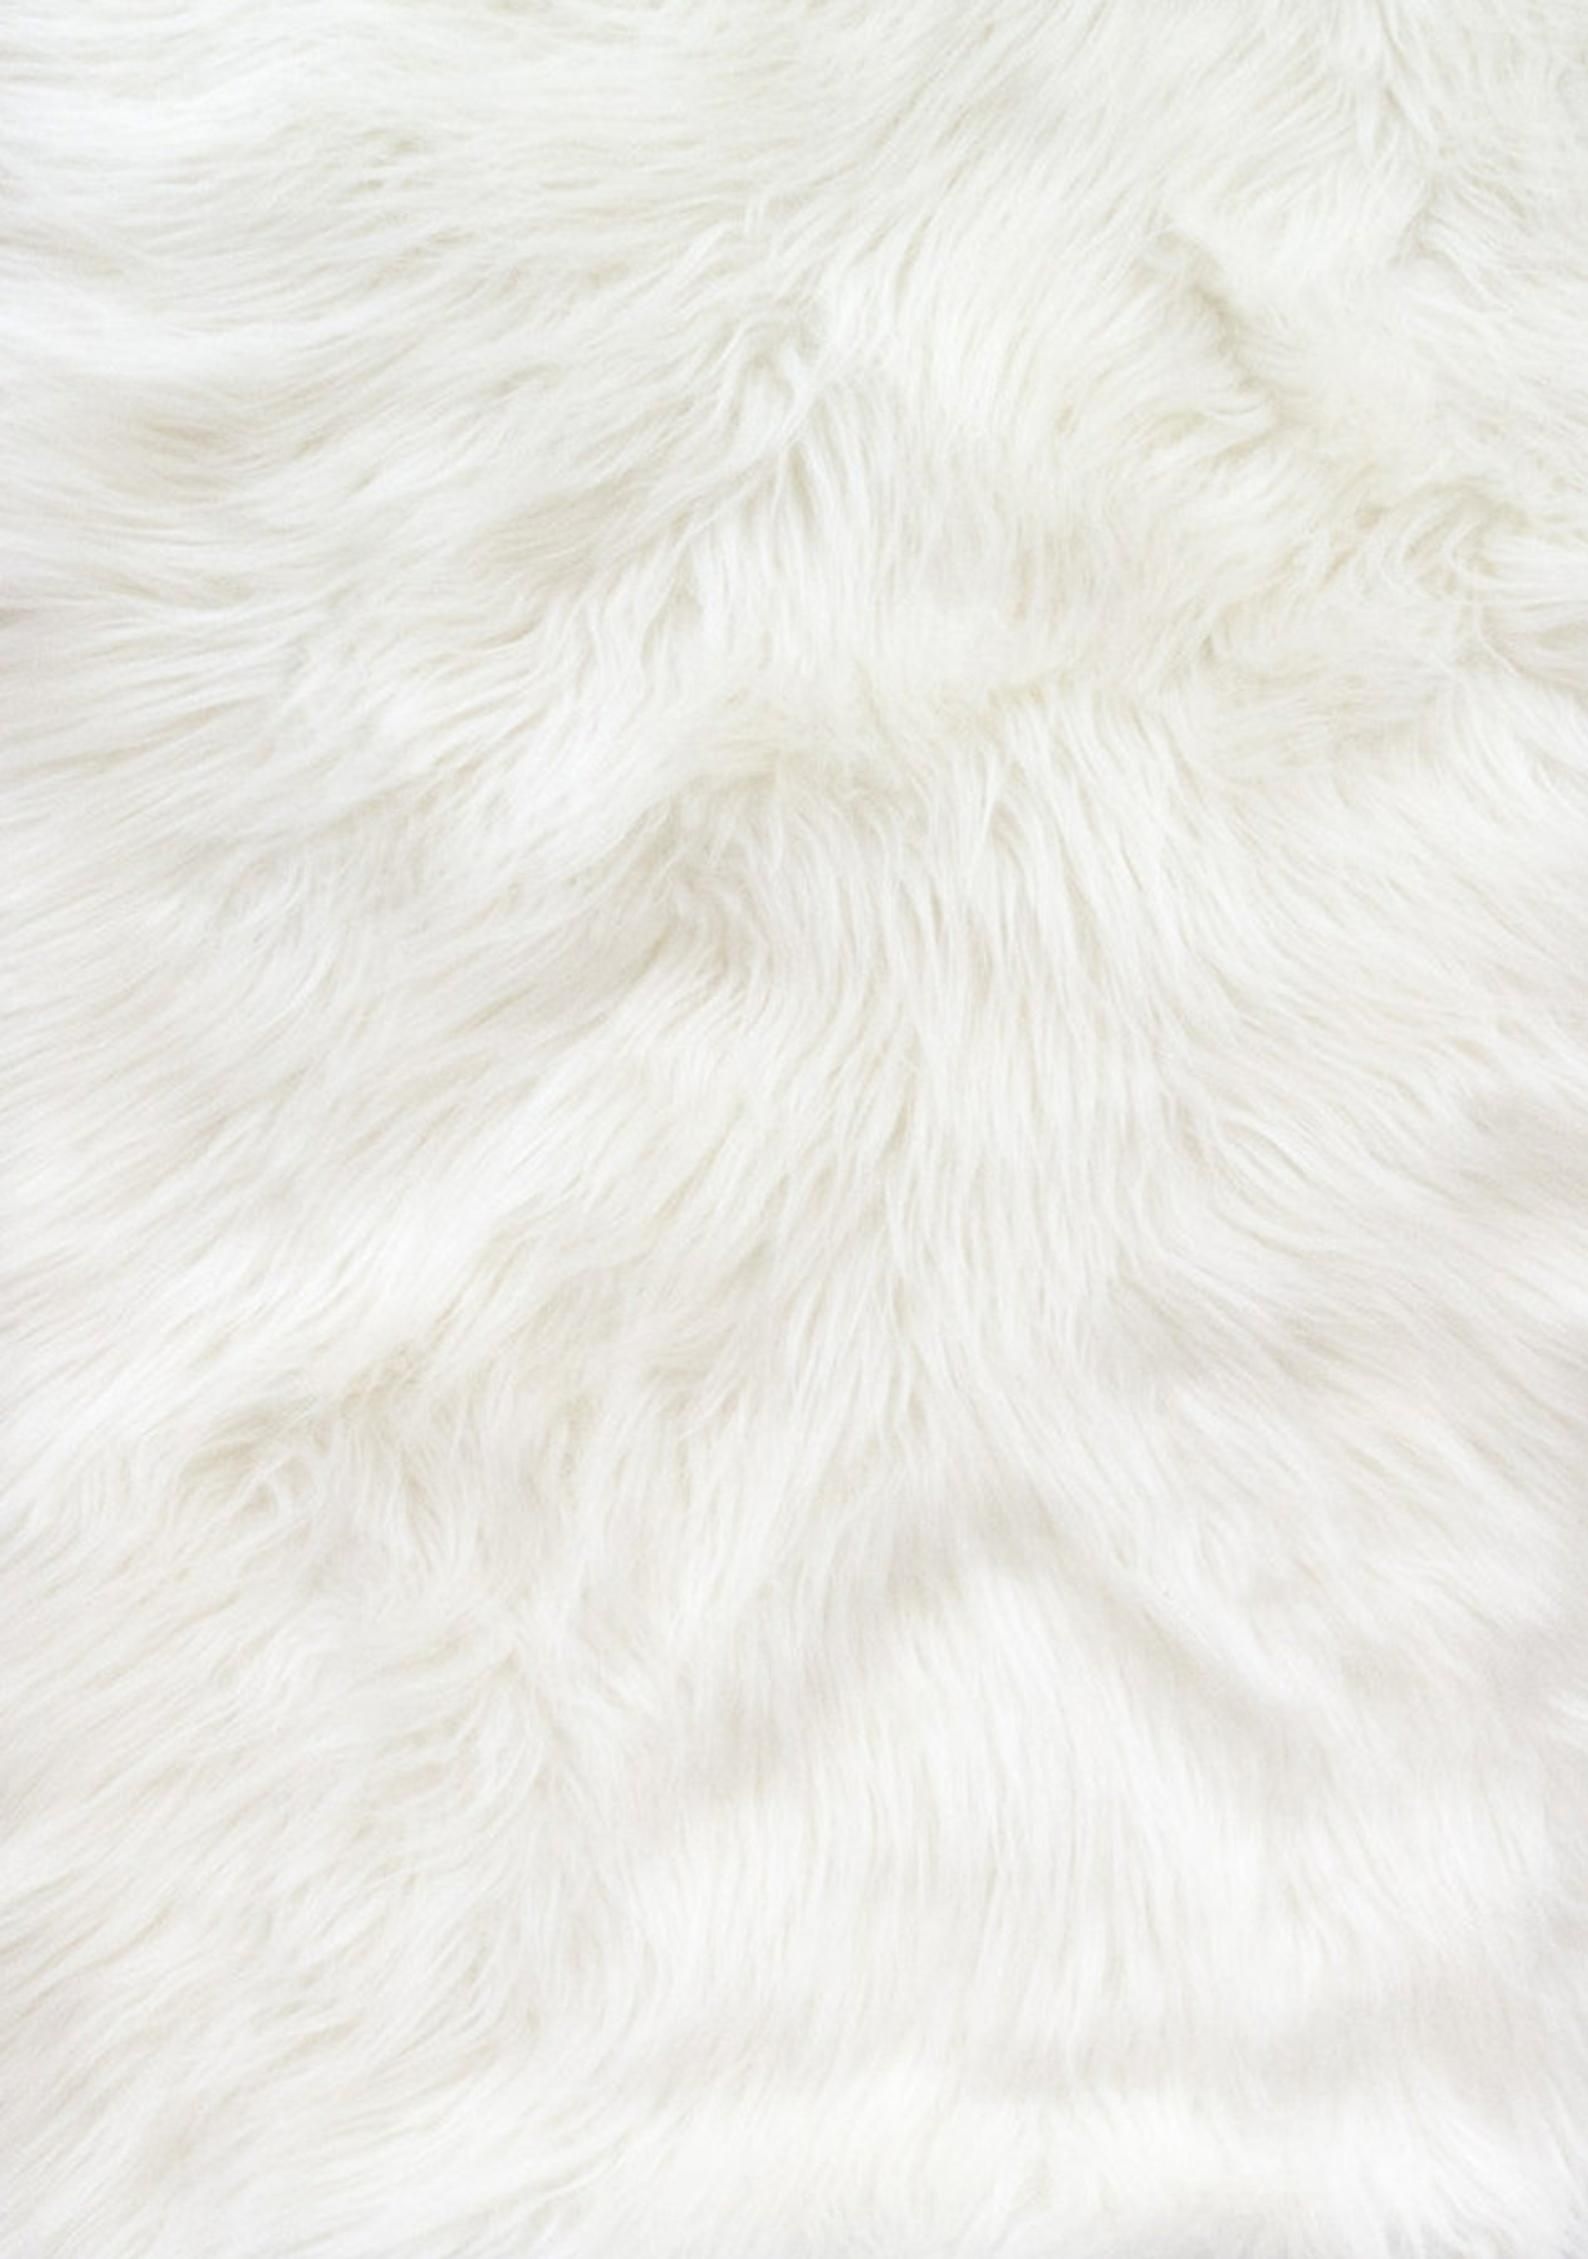 White shaggy fur, Soft and fluffy, Textured fabric, Faux fur, 1590x2260 HD Handy